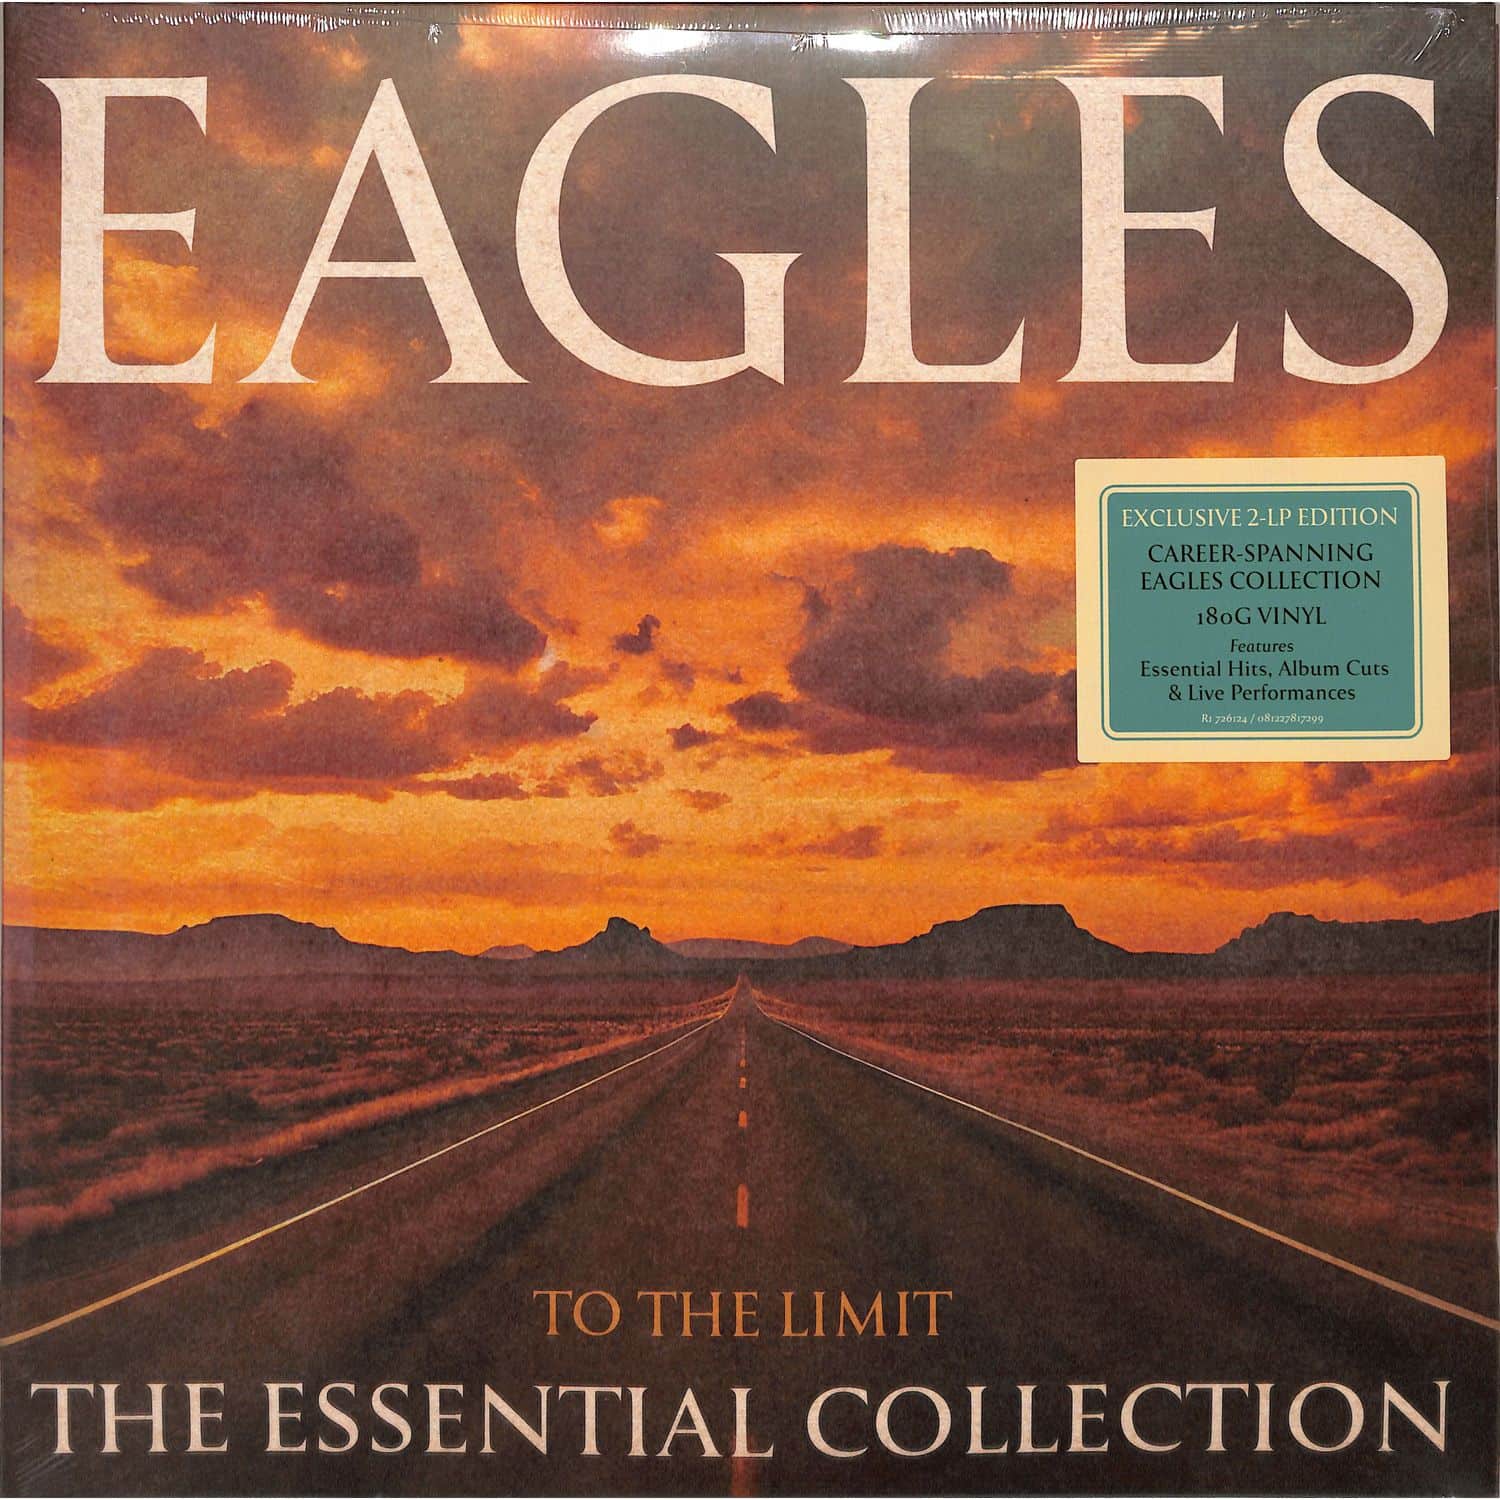 Eagles - TO THE LIMIT: THE ESSENTIAL COLLECTION 